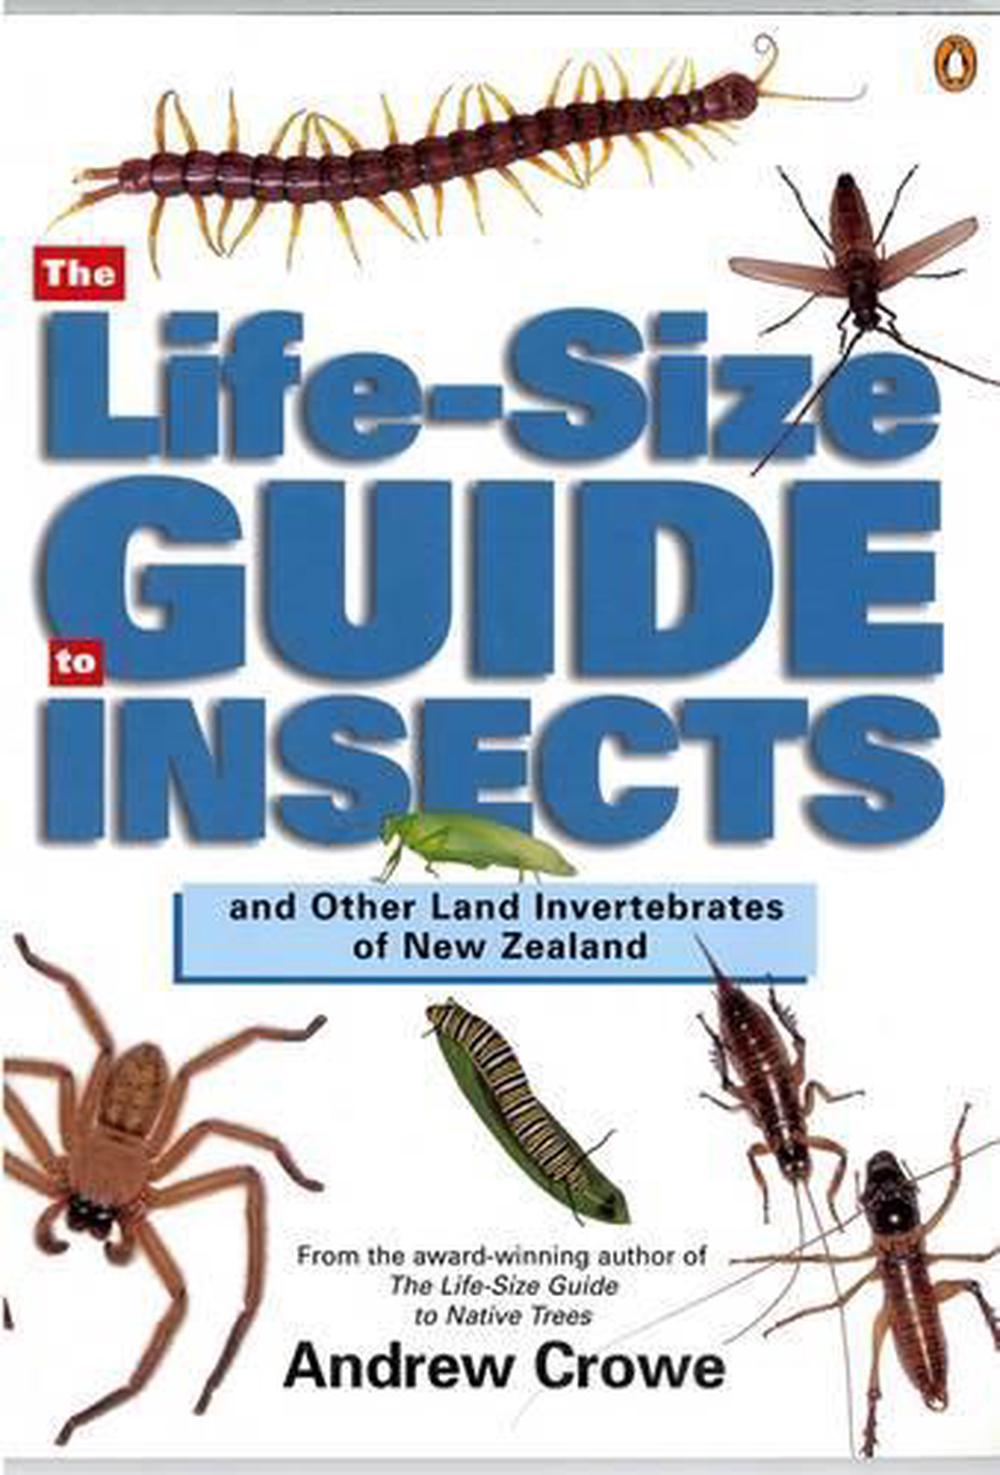 The Life Size Guide To Insects And Other Land Invertebrates Of New Zealand By Andrew Crowe 8465